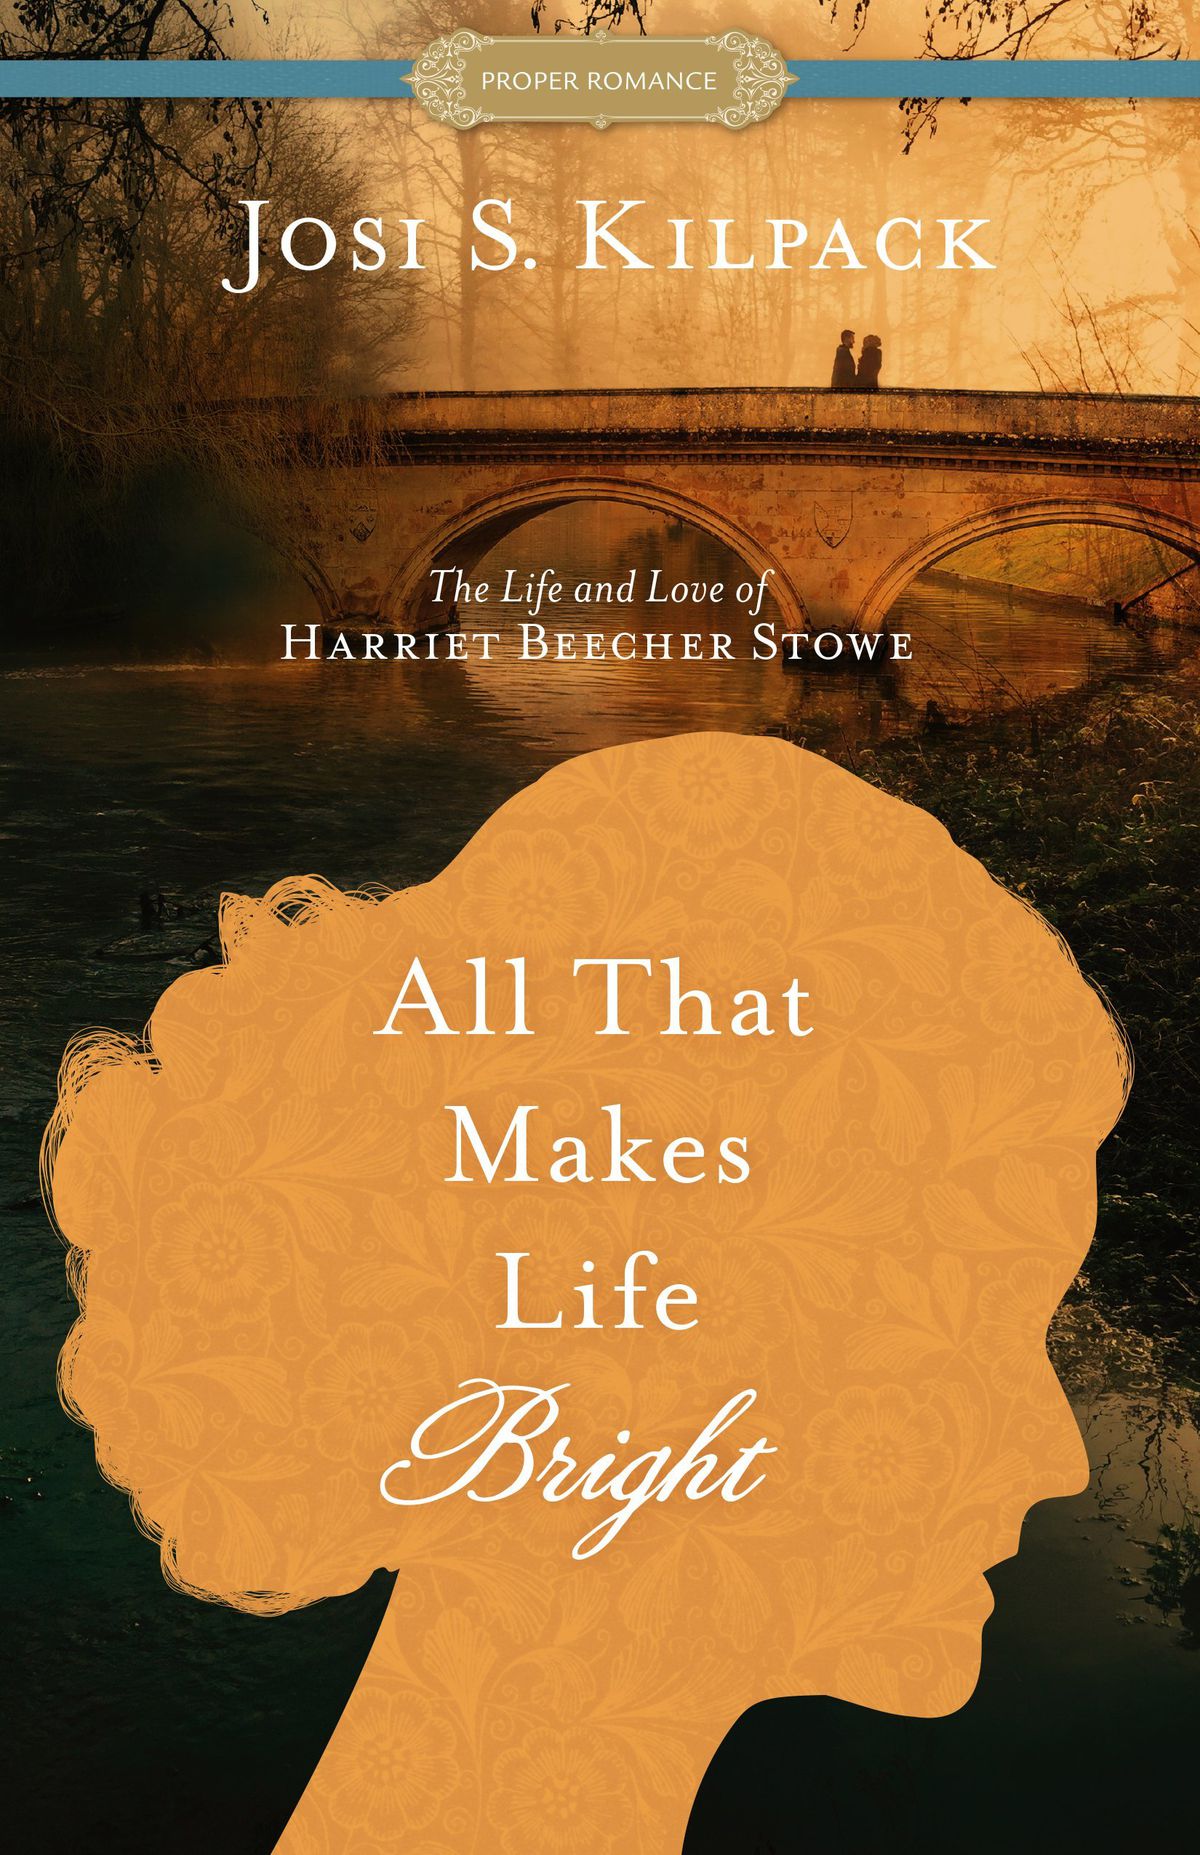 "Al the Makes Life Bright: The Life and Love of Harriet Beecher Stowe" is by Josi S. Kilpack.